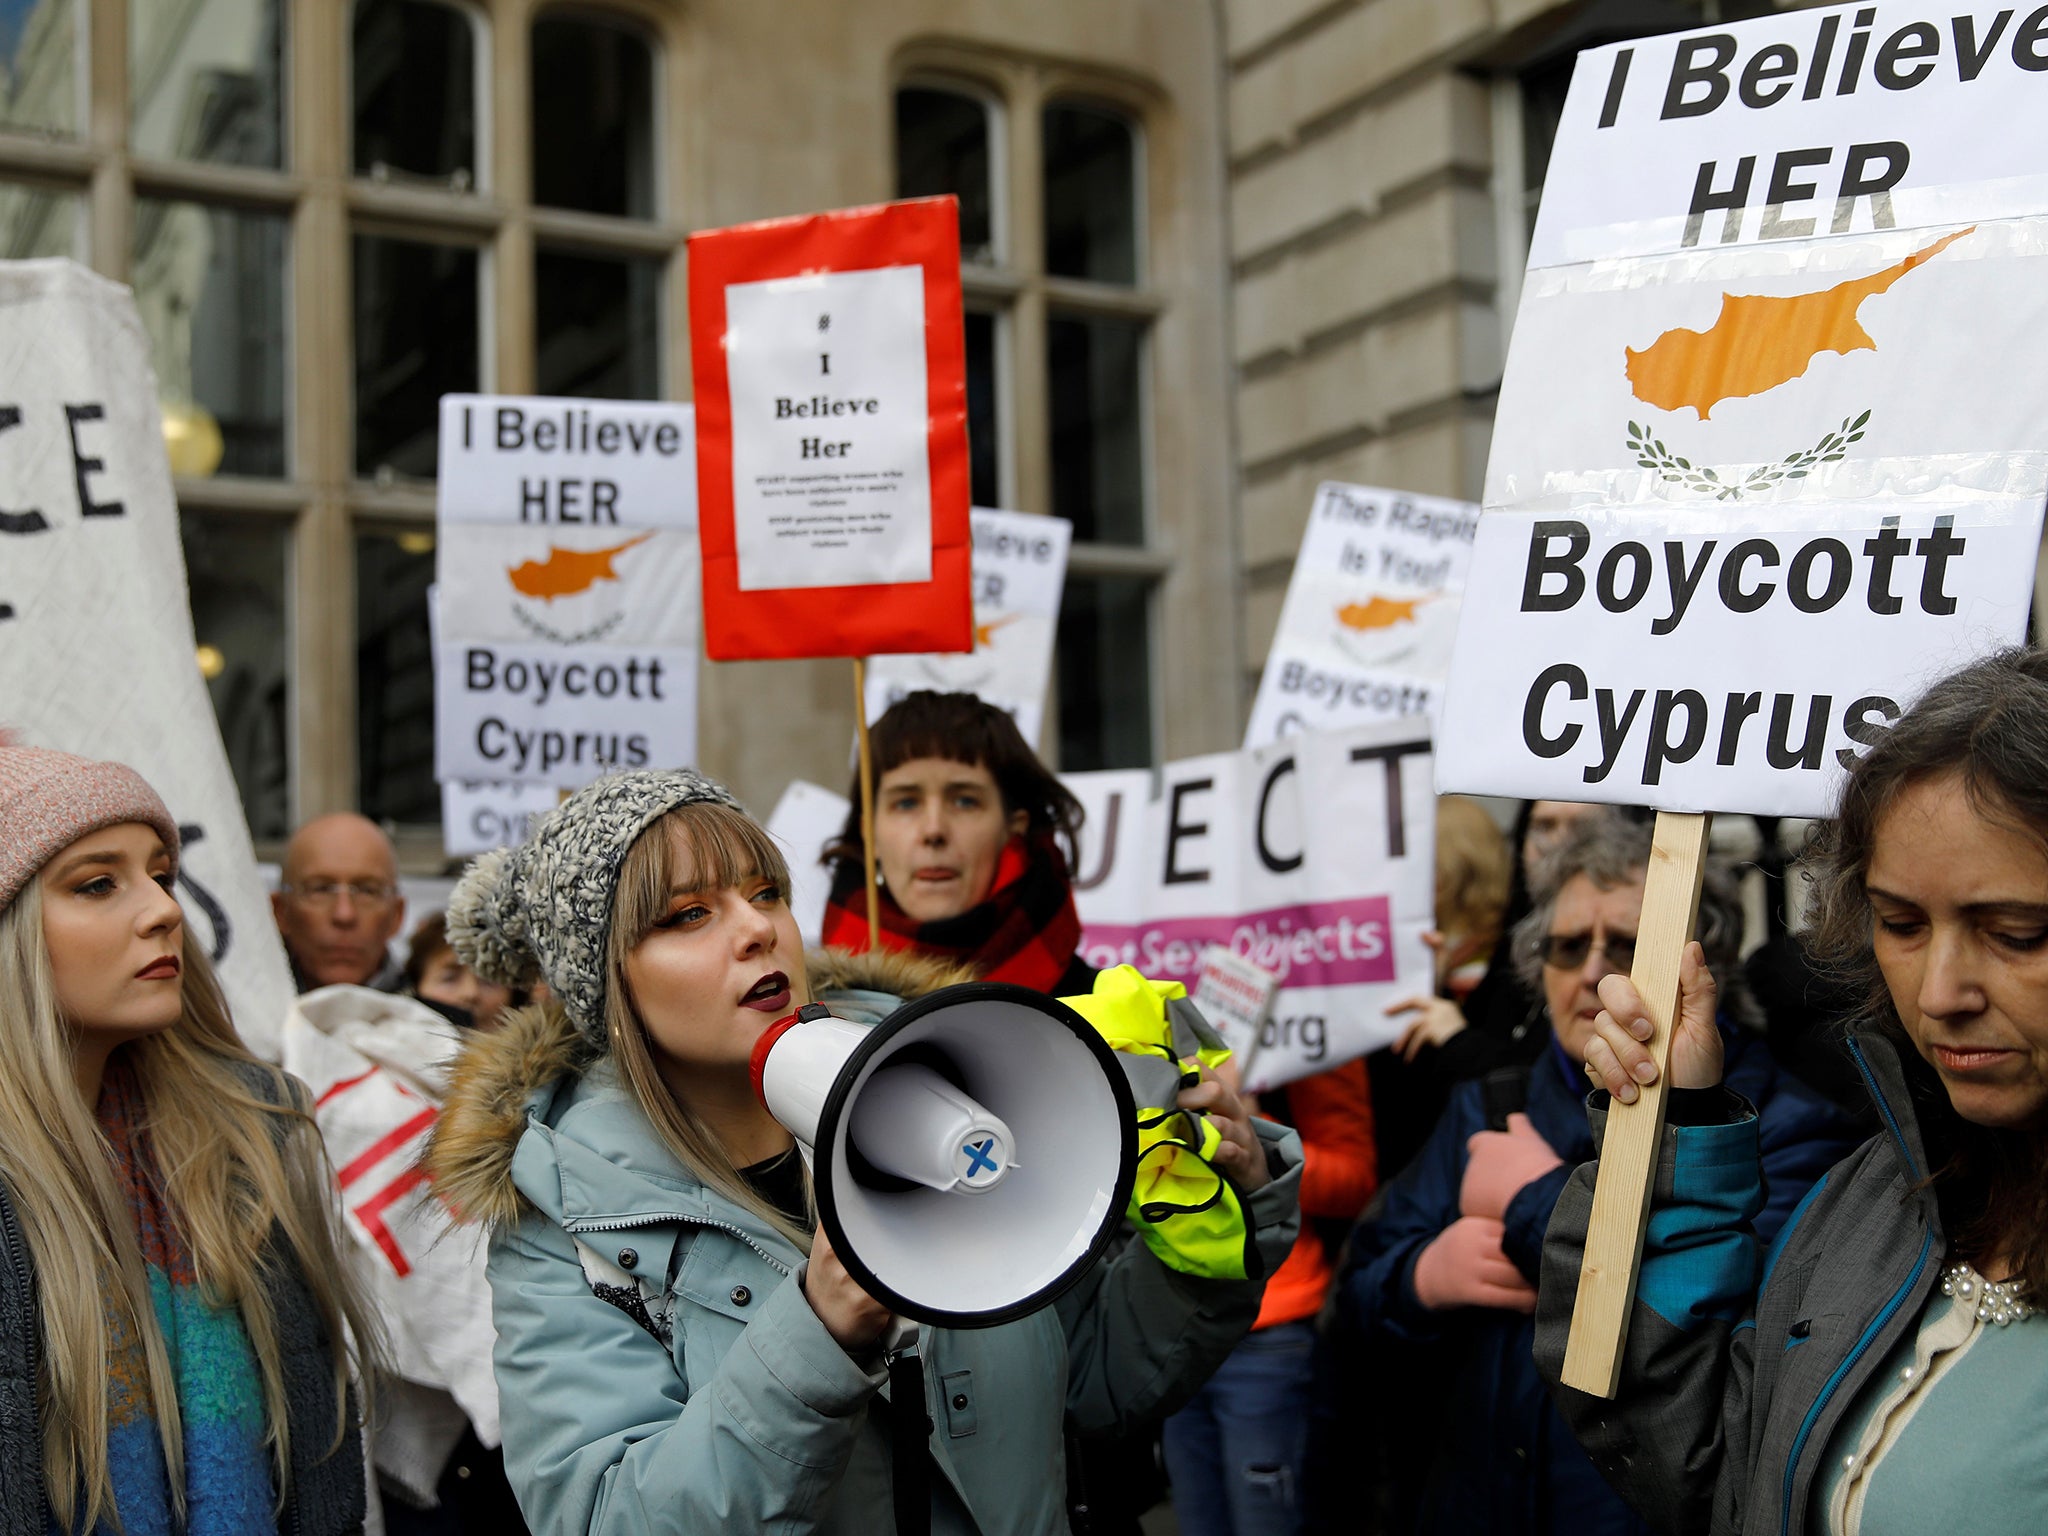 Demonstrators hold placards calling for a boycott on Cyprus as they protest in London